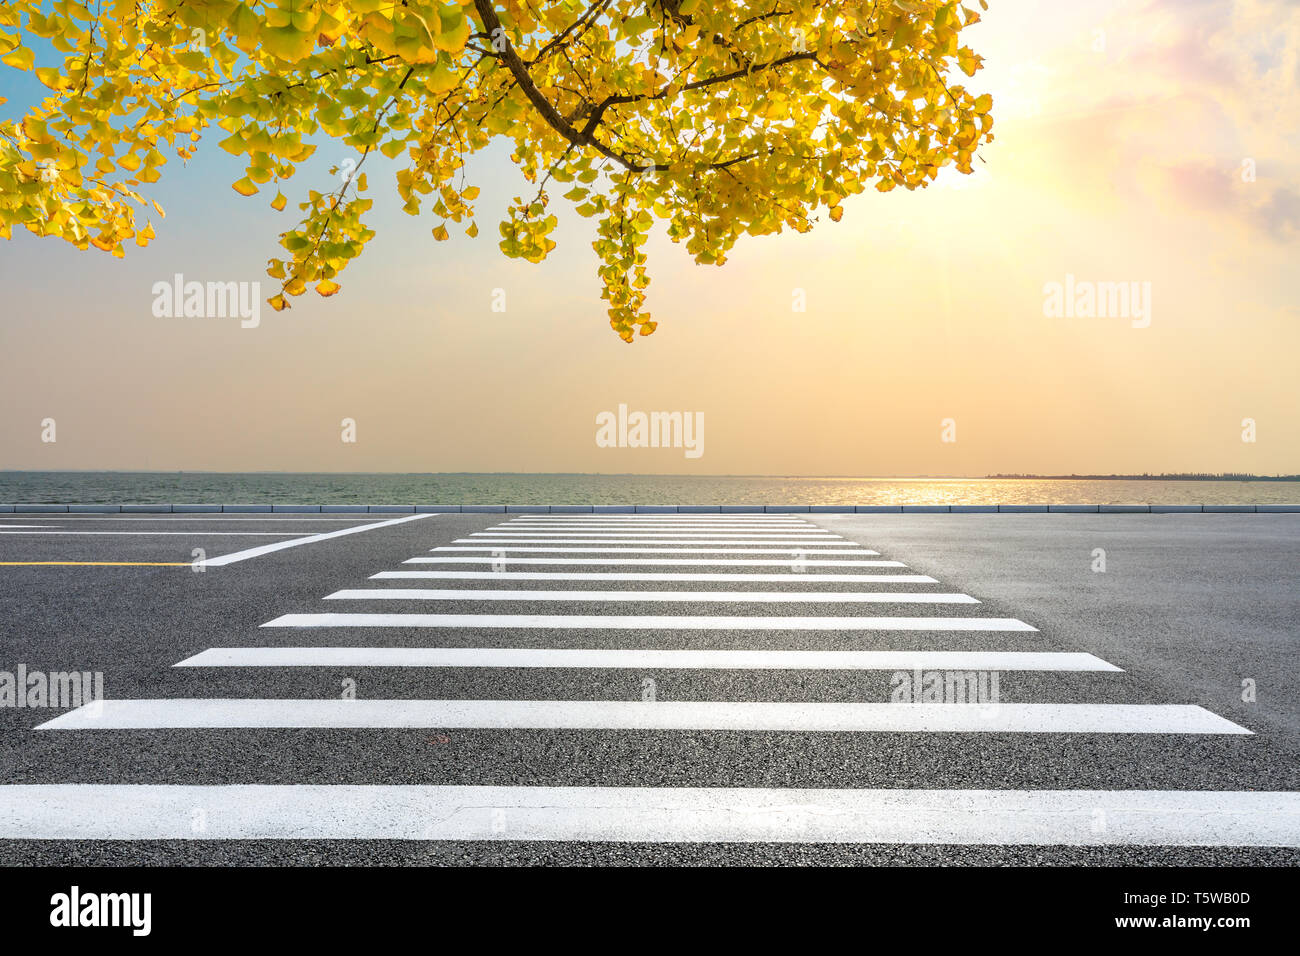 Zebra crossing road and river with yellow ginkgo tree landscape Stock Photo